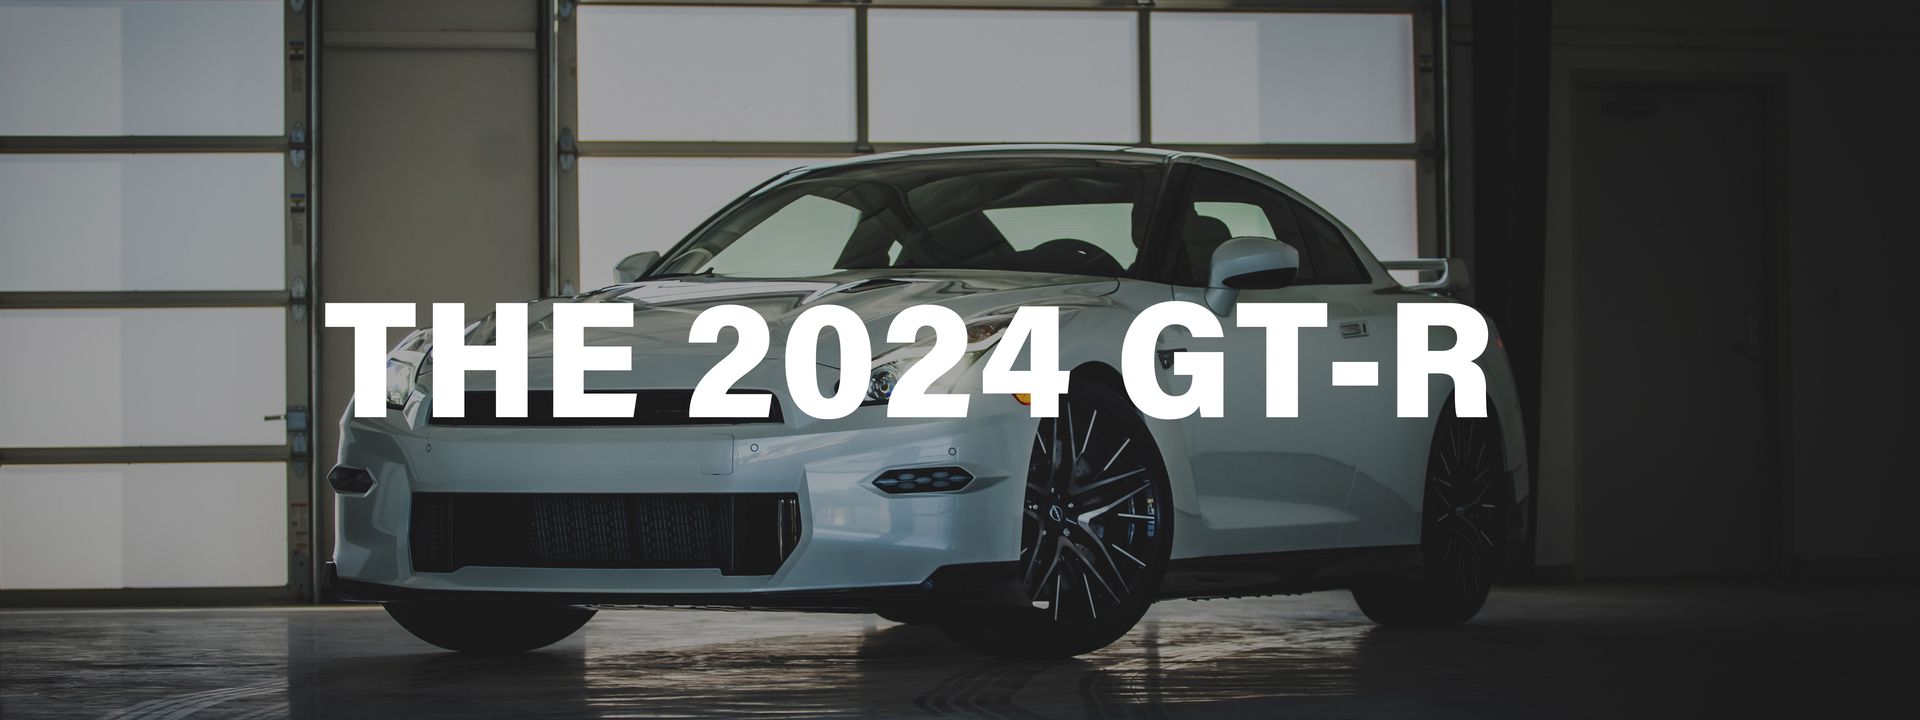 A white car is parked in a garage with the words `` the 2024 gt-r '' written above it.